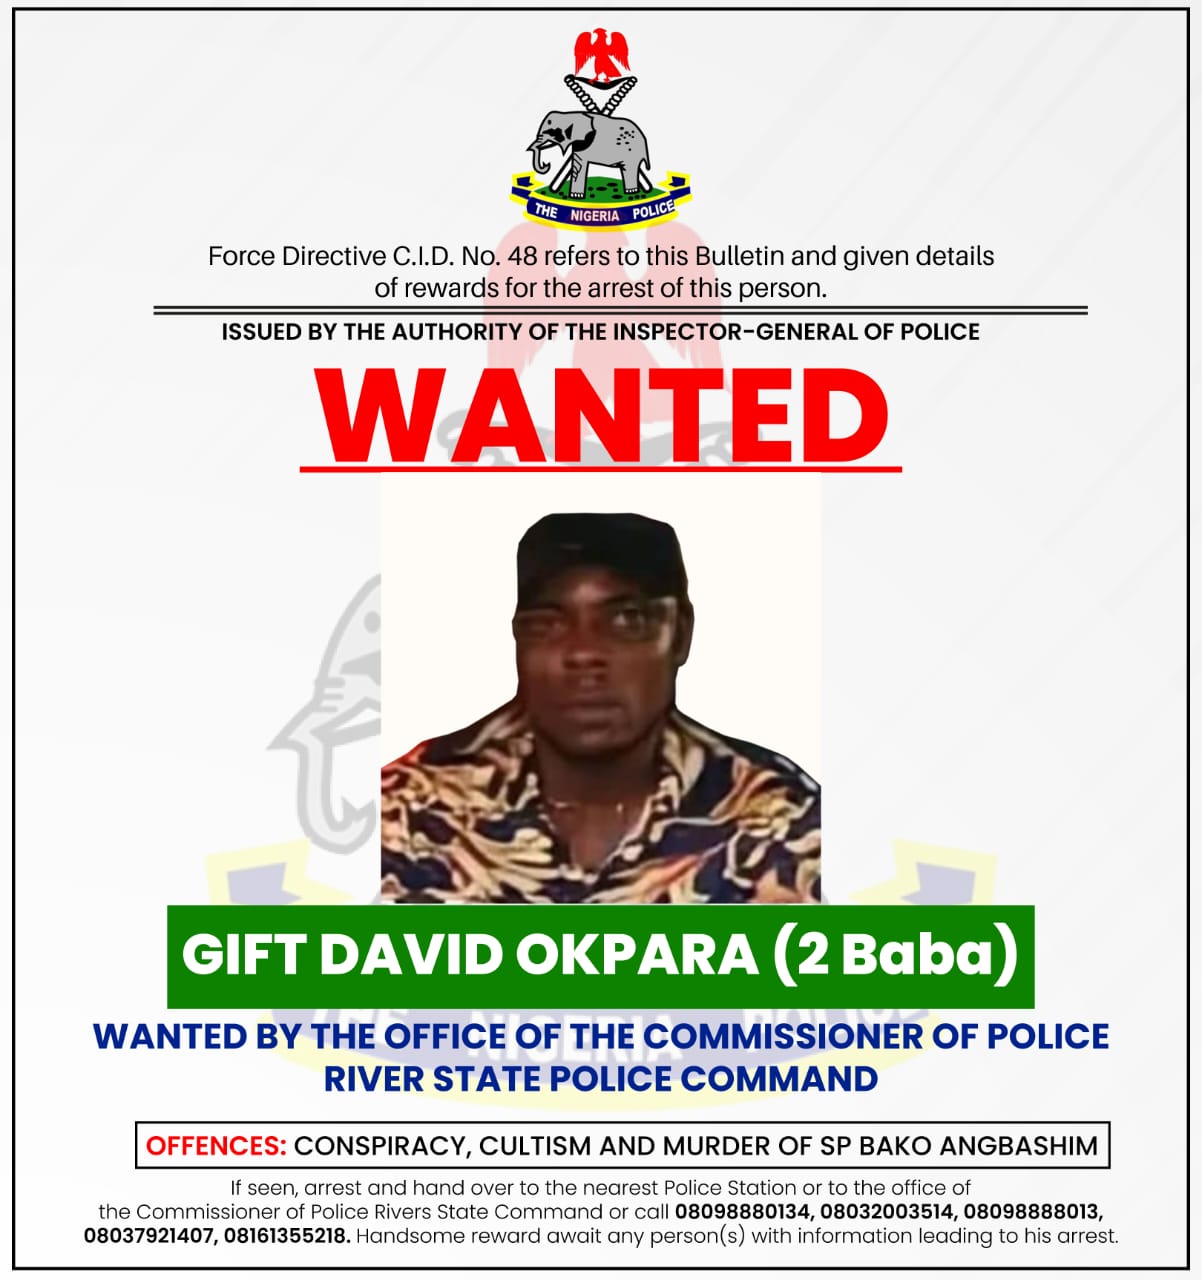 2 Baba declared wanted for killing Rivers DPO